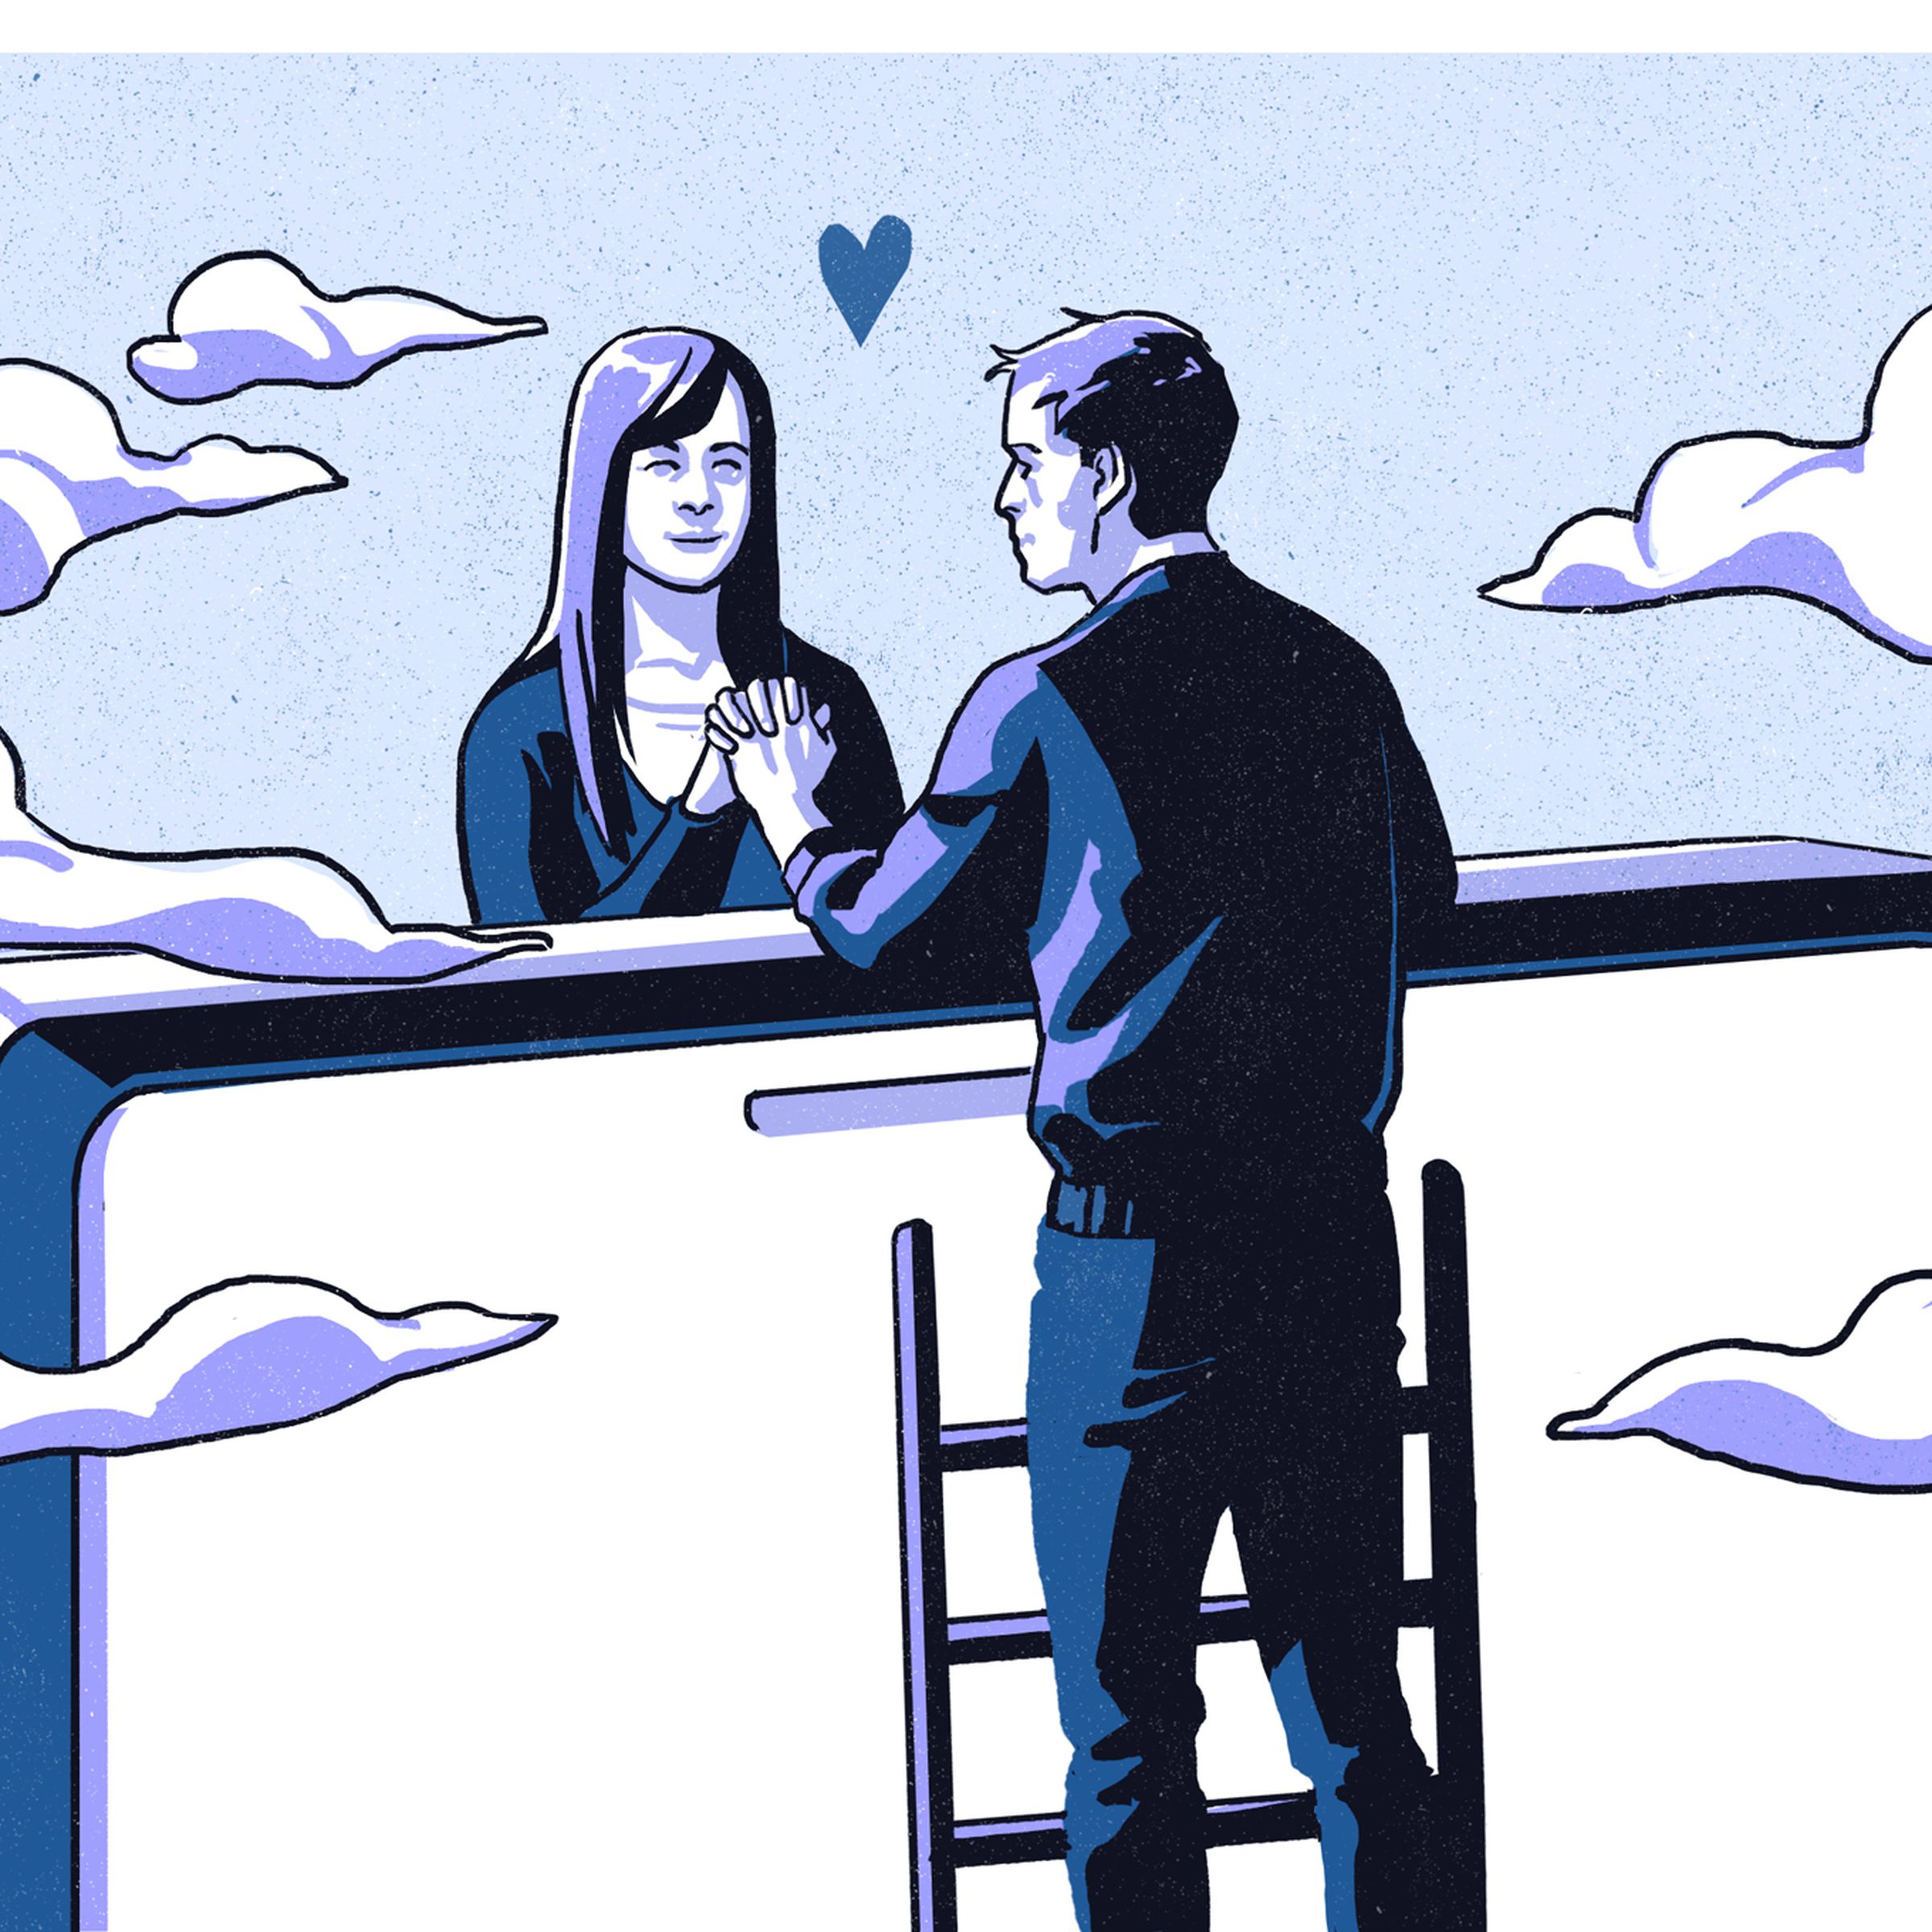 An illustration of two people meeting each other around a giant phone.